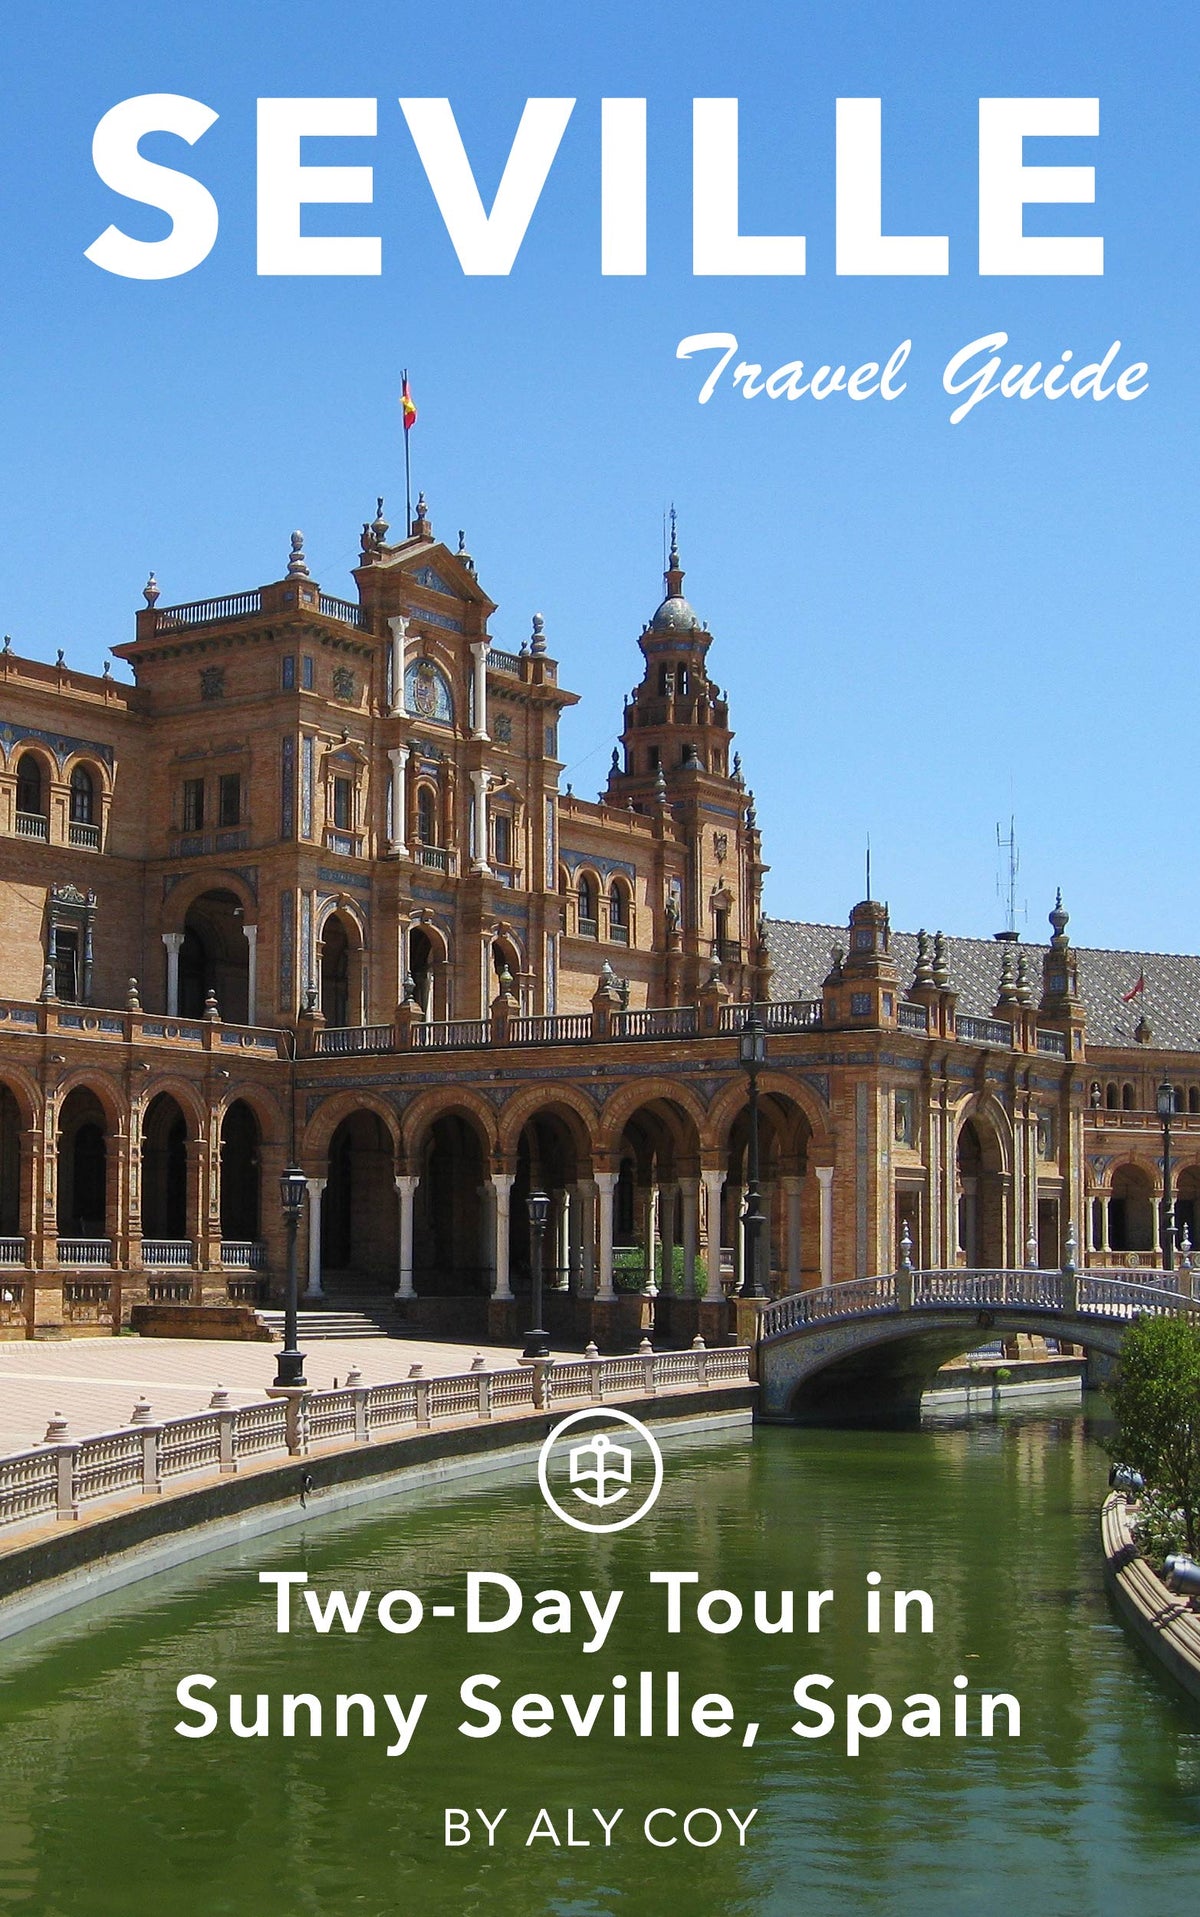 Two-Day Tour in Sunny Seville, Spain